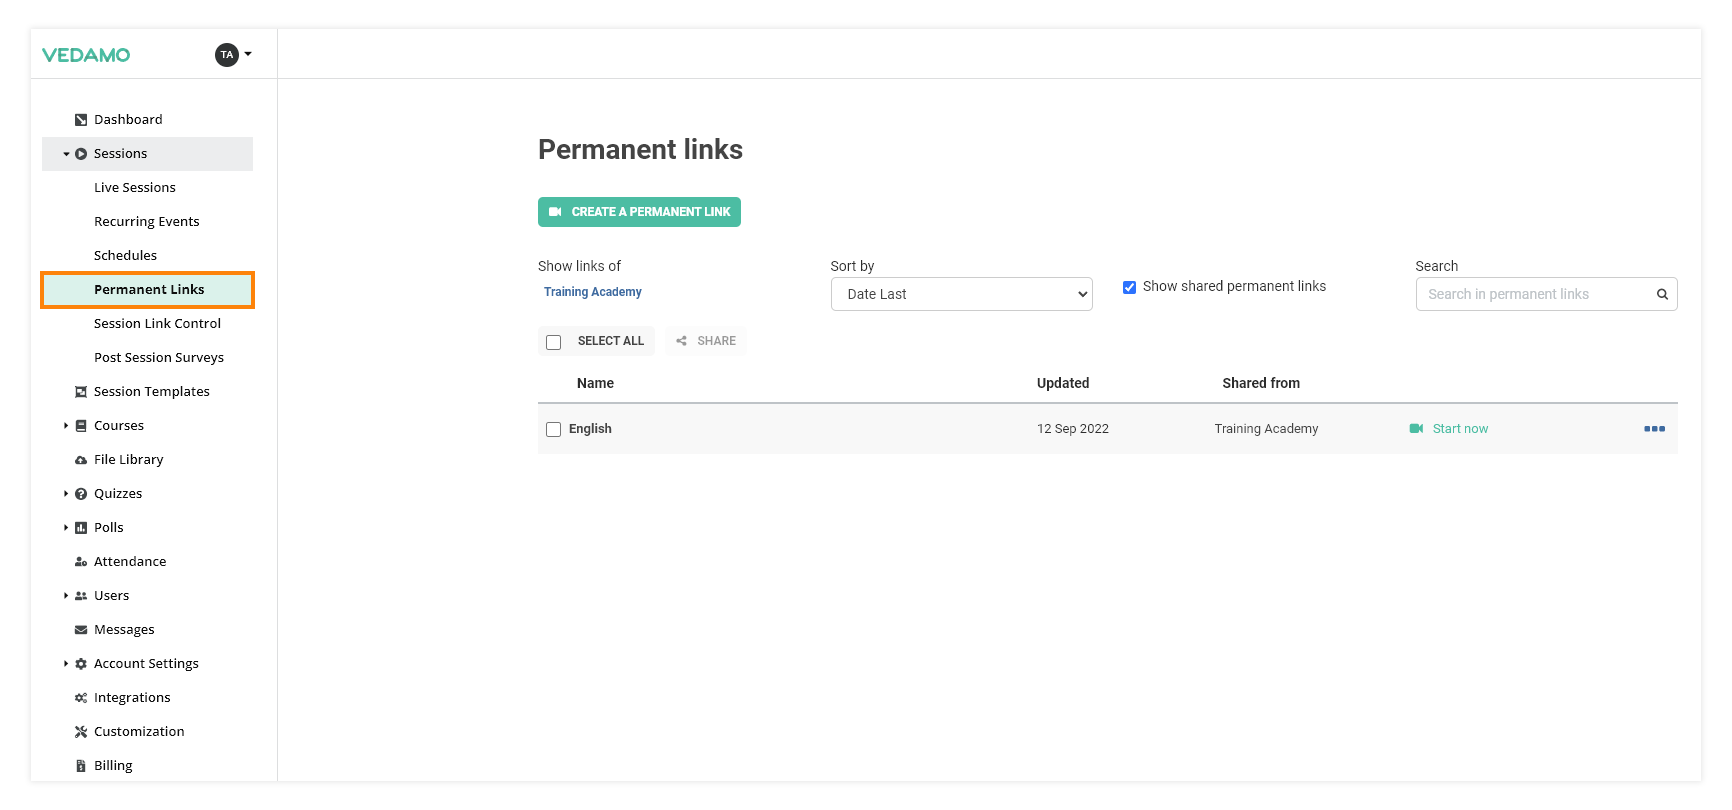 Permanent Links in the VEDAMO platform: list of permanent links